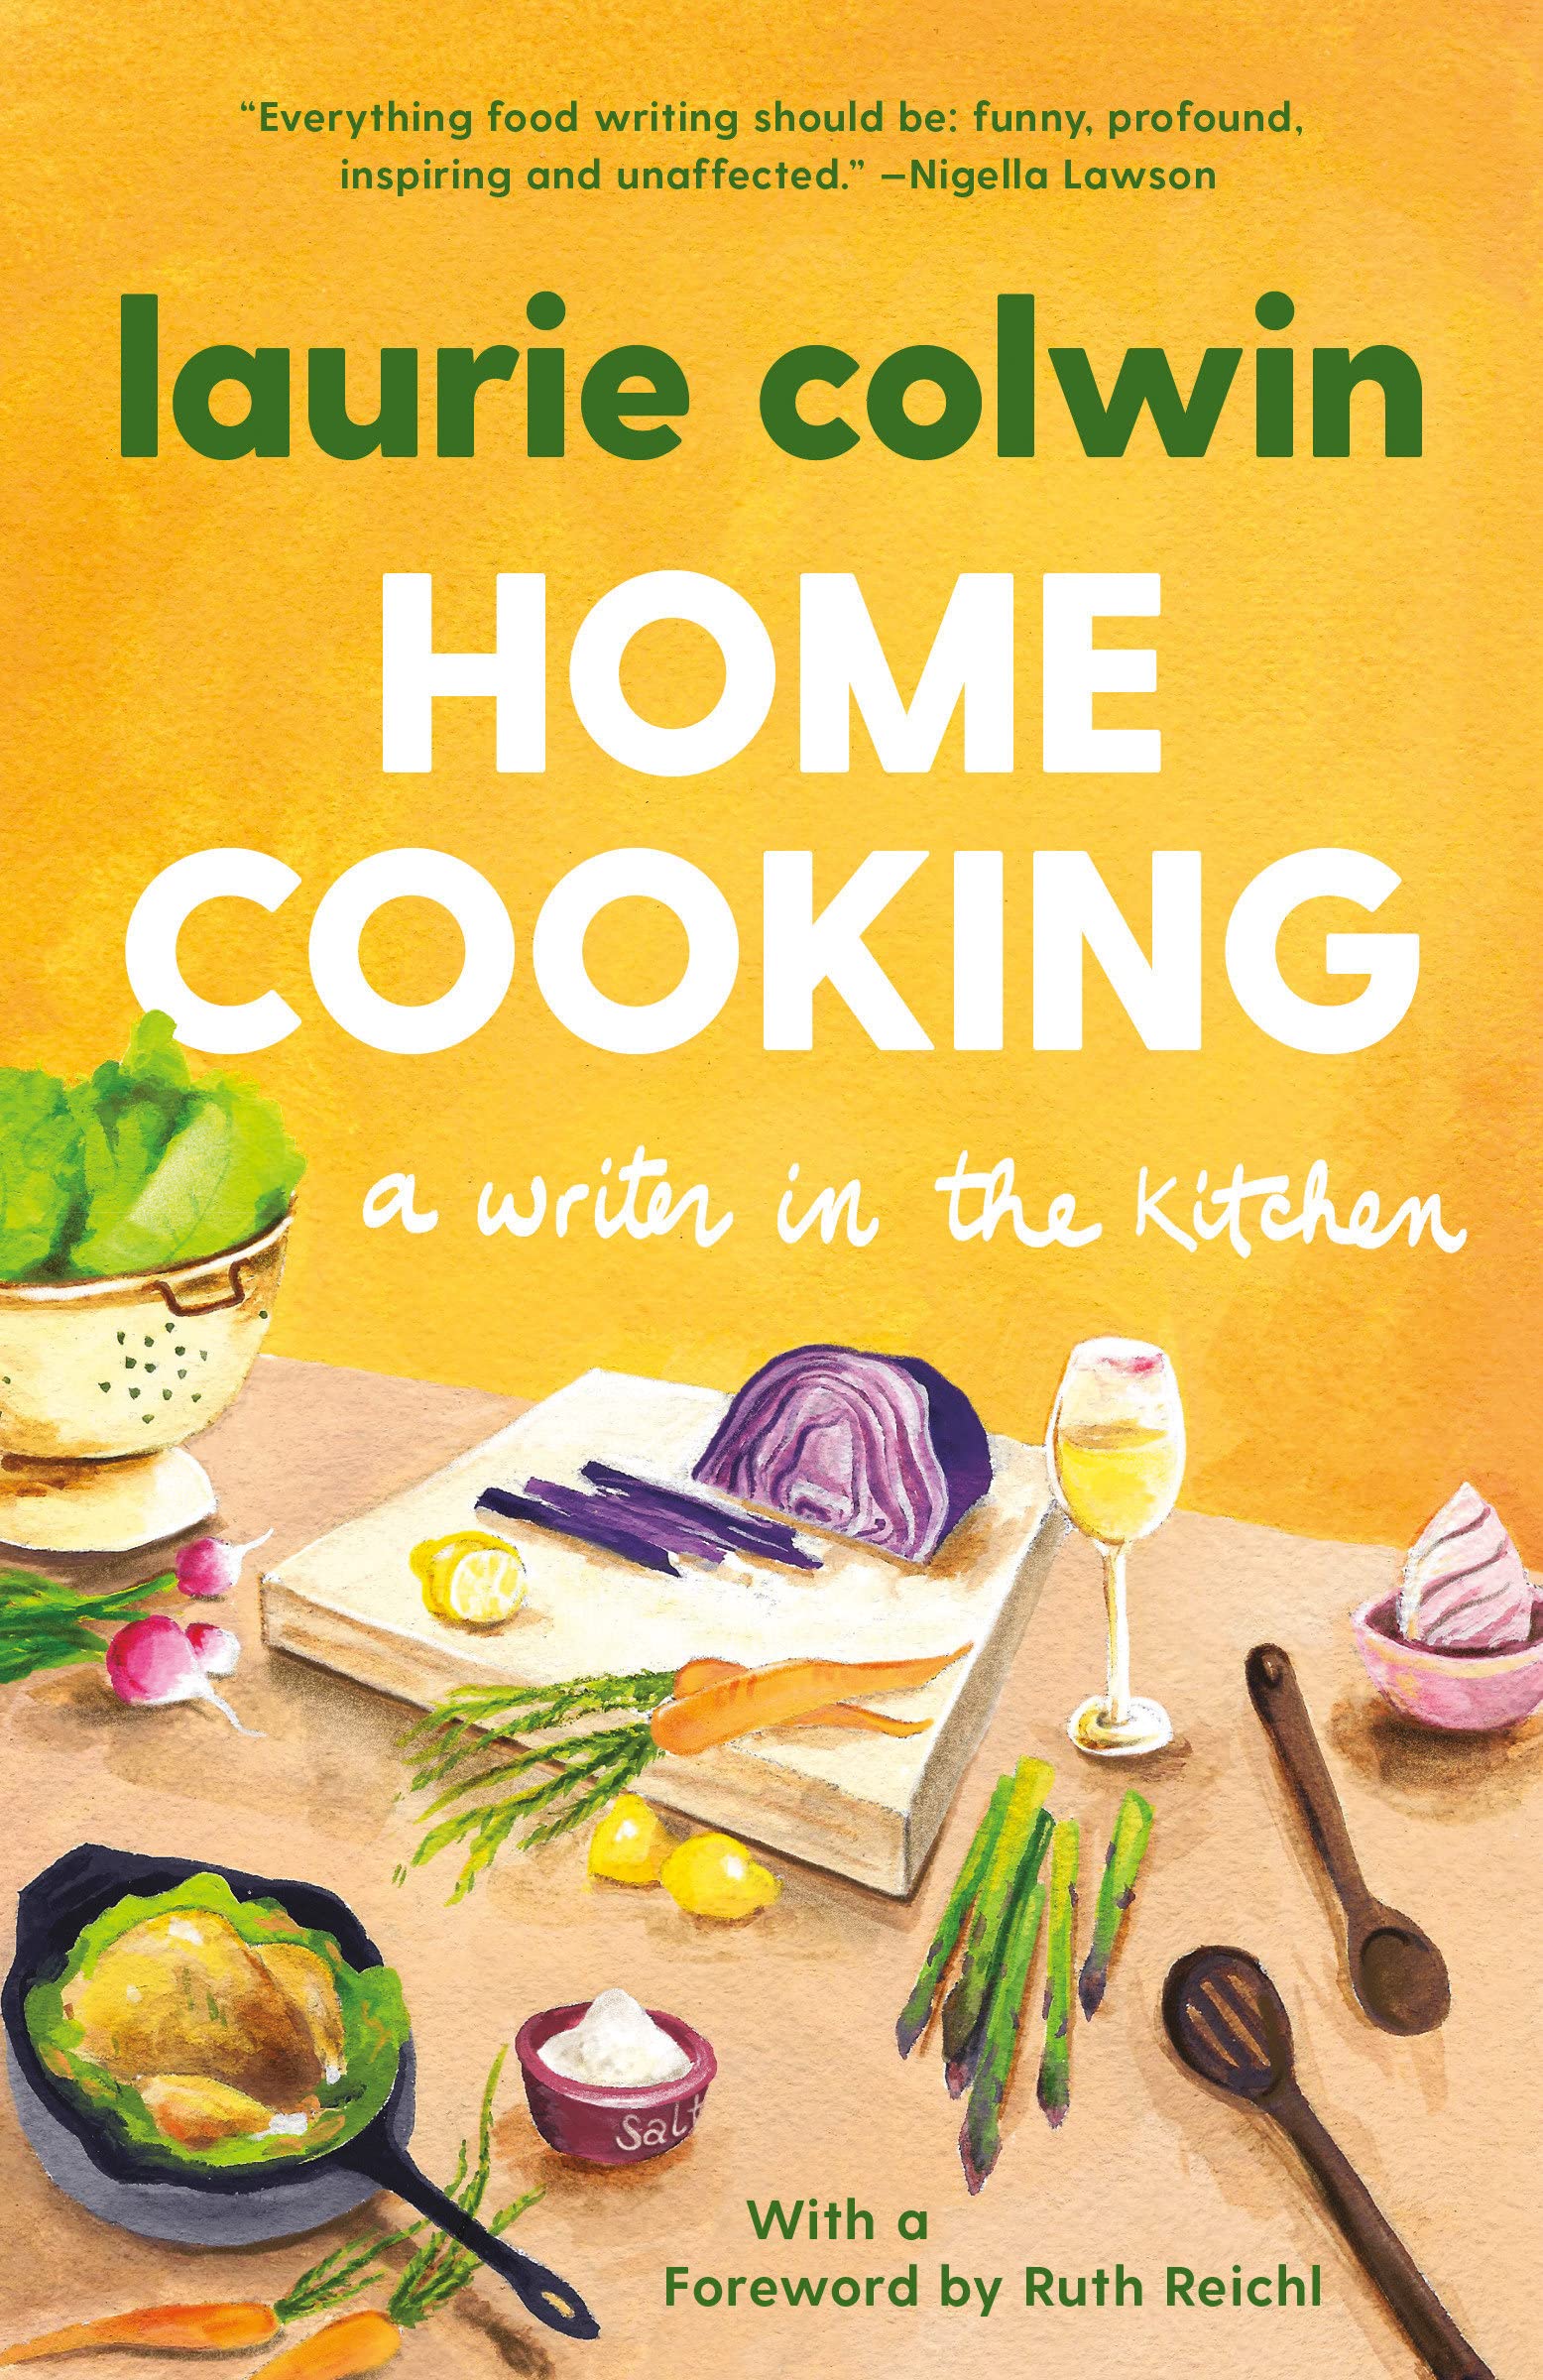 Home Cooking: A Writer in the Kitchen (Laurie Colwin)